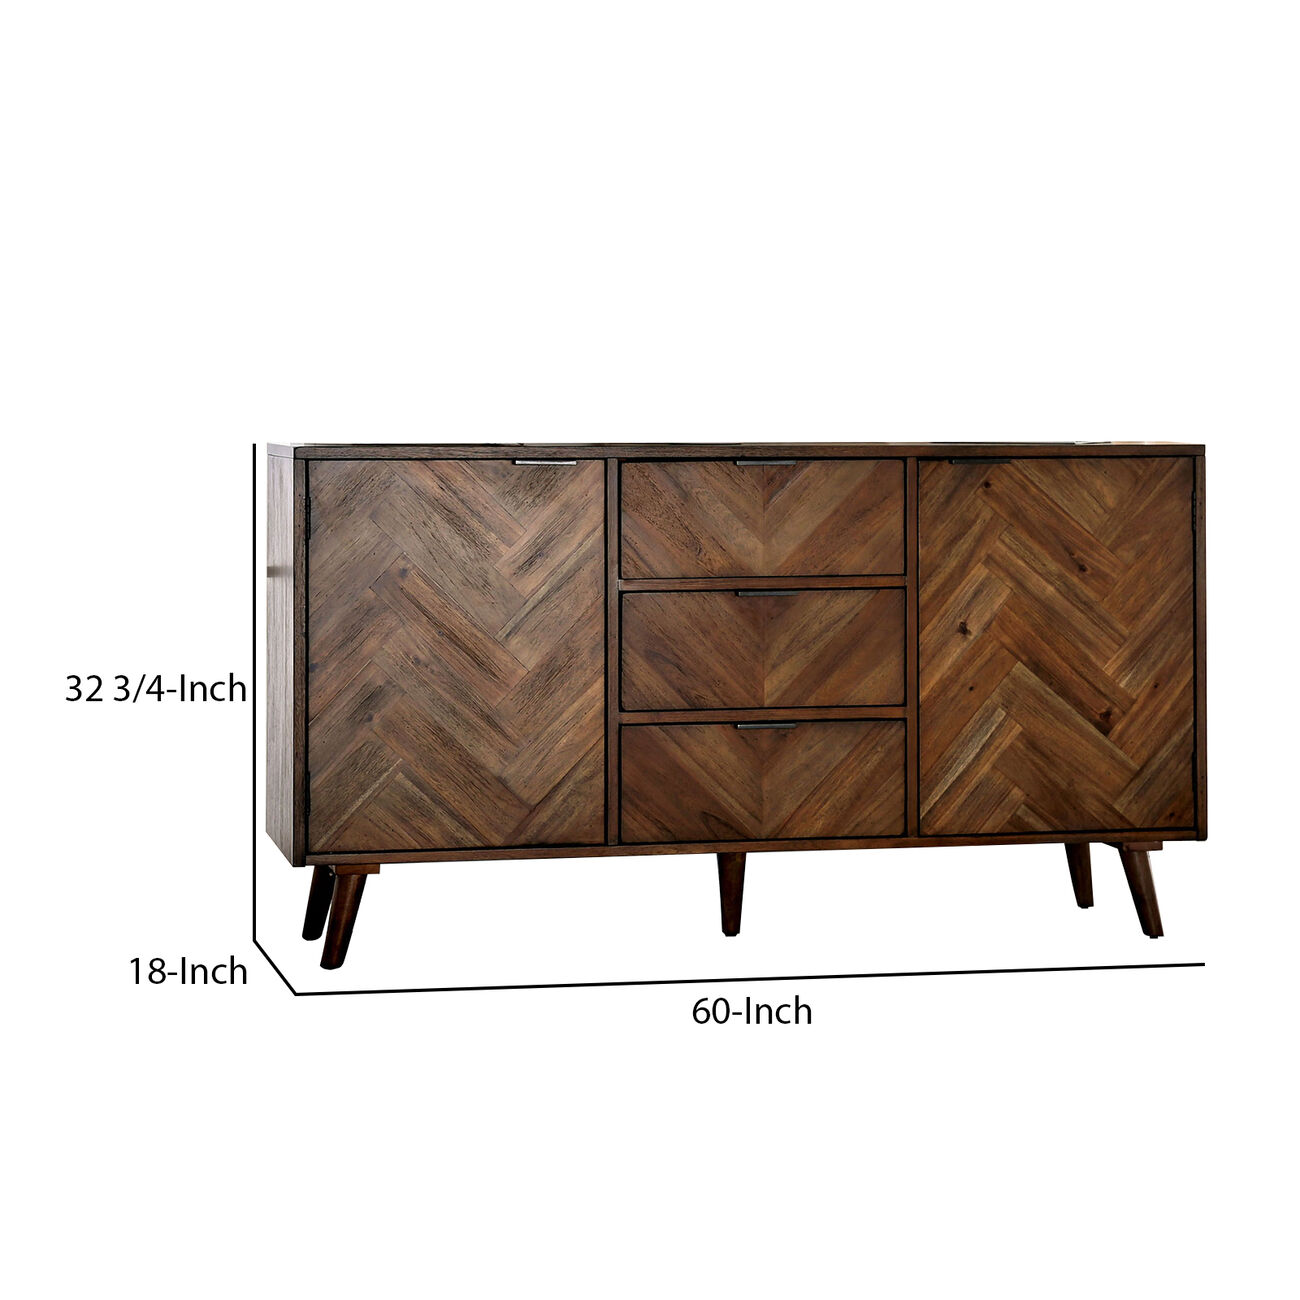 Wooden Server with Angled legs and 3 Spacious Drawers, Brown